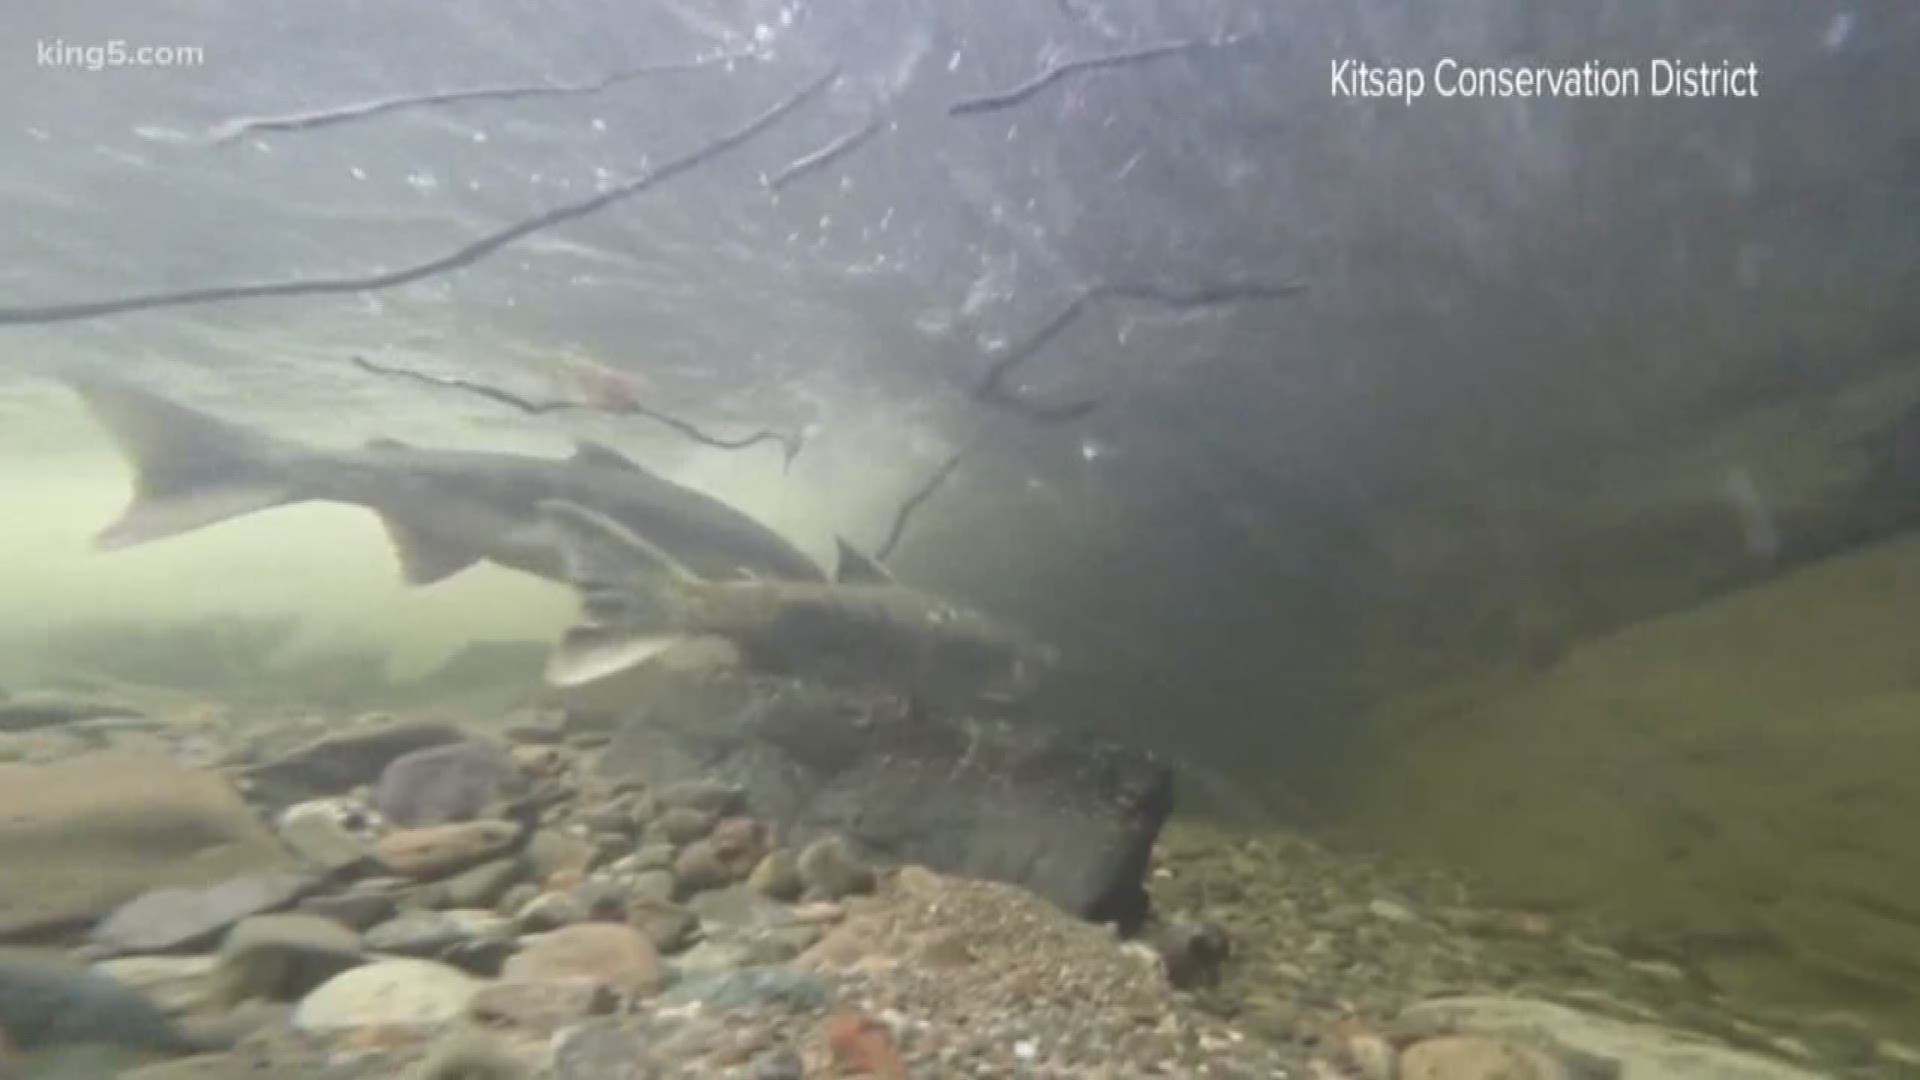 A new grant will help clear out barriers that prevent salmon from reaching spawning areas.